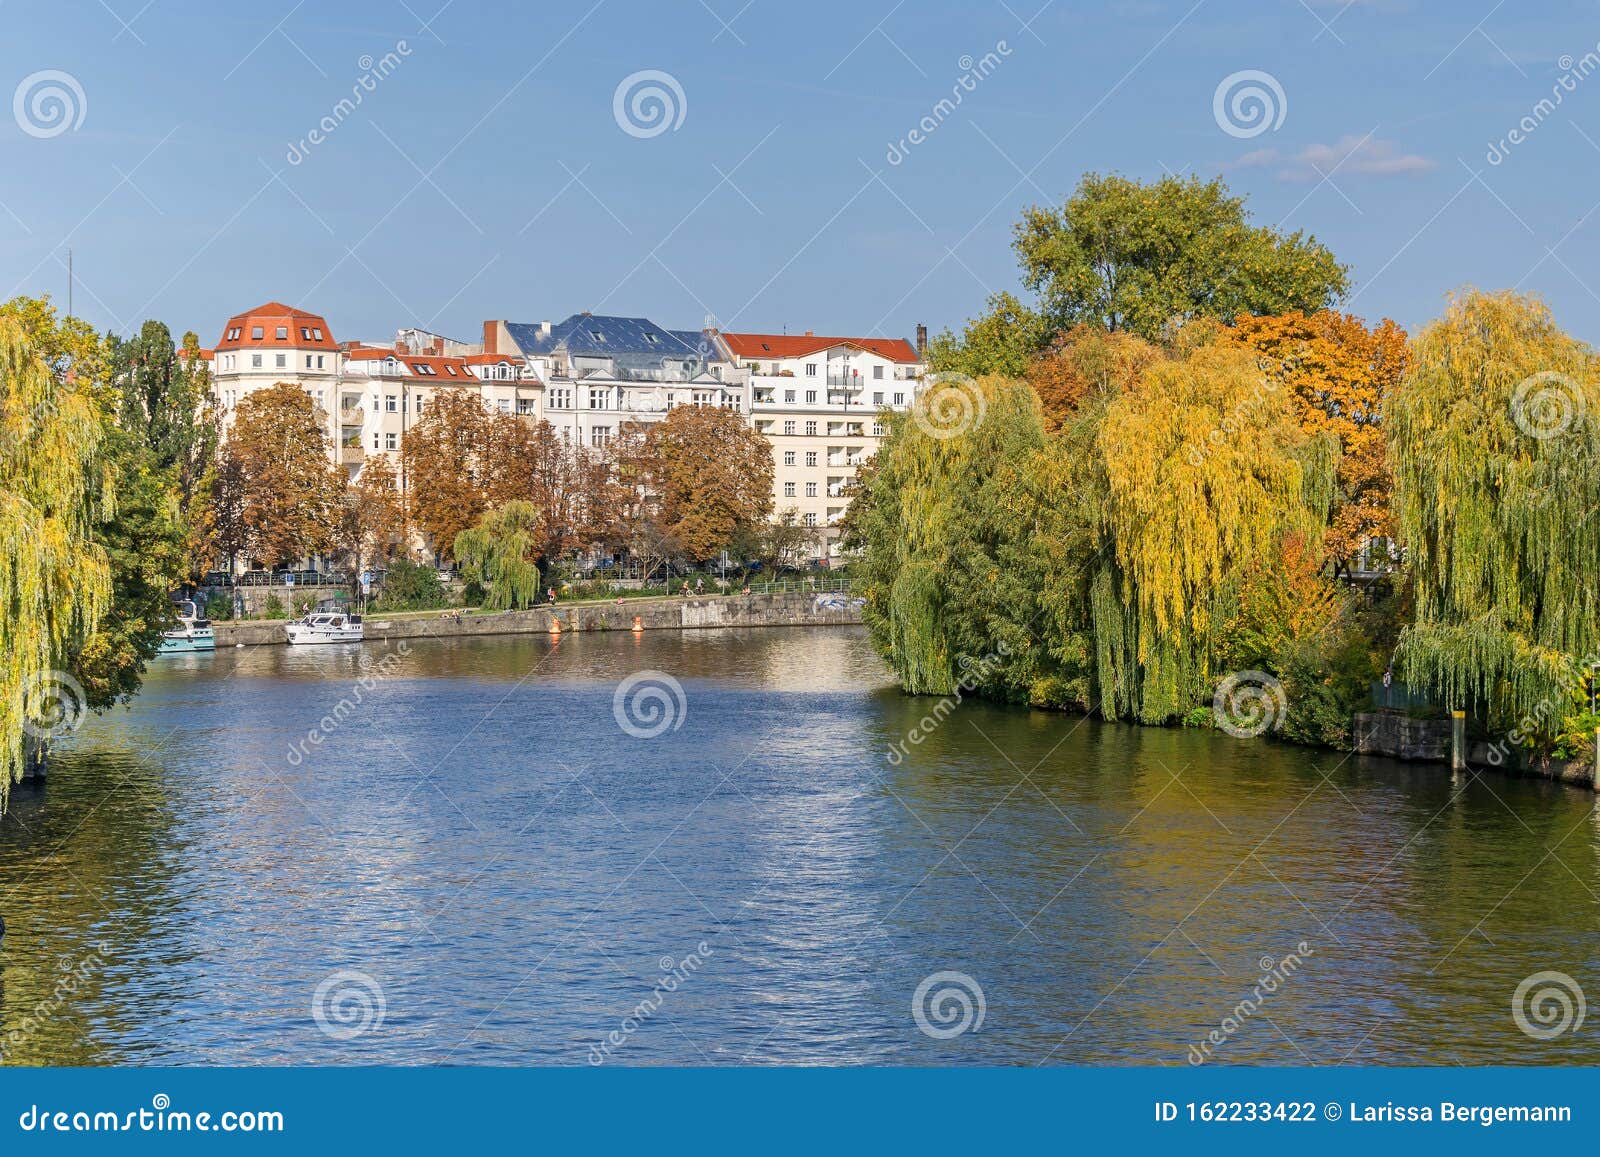 Banks Of The River Spree With Autumn Coloured Trees And